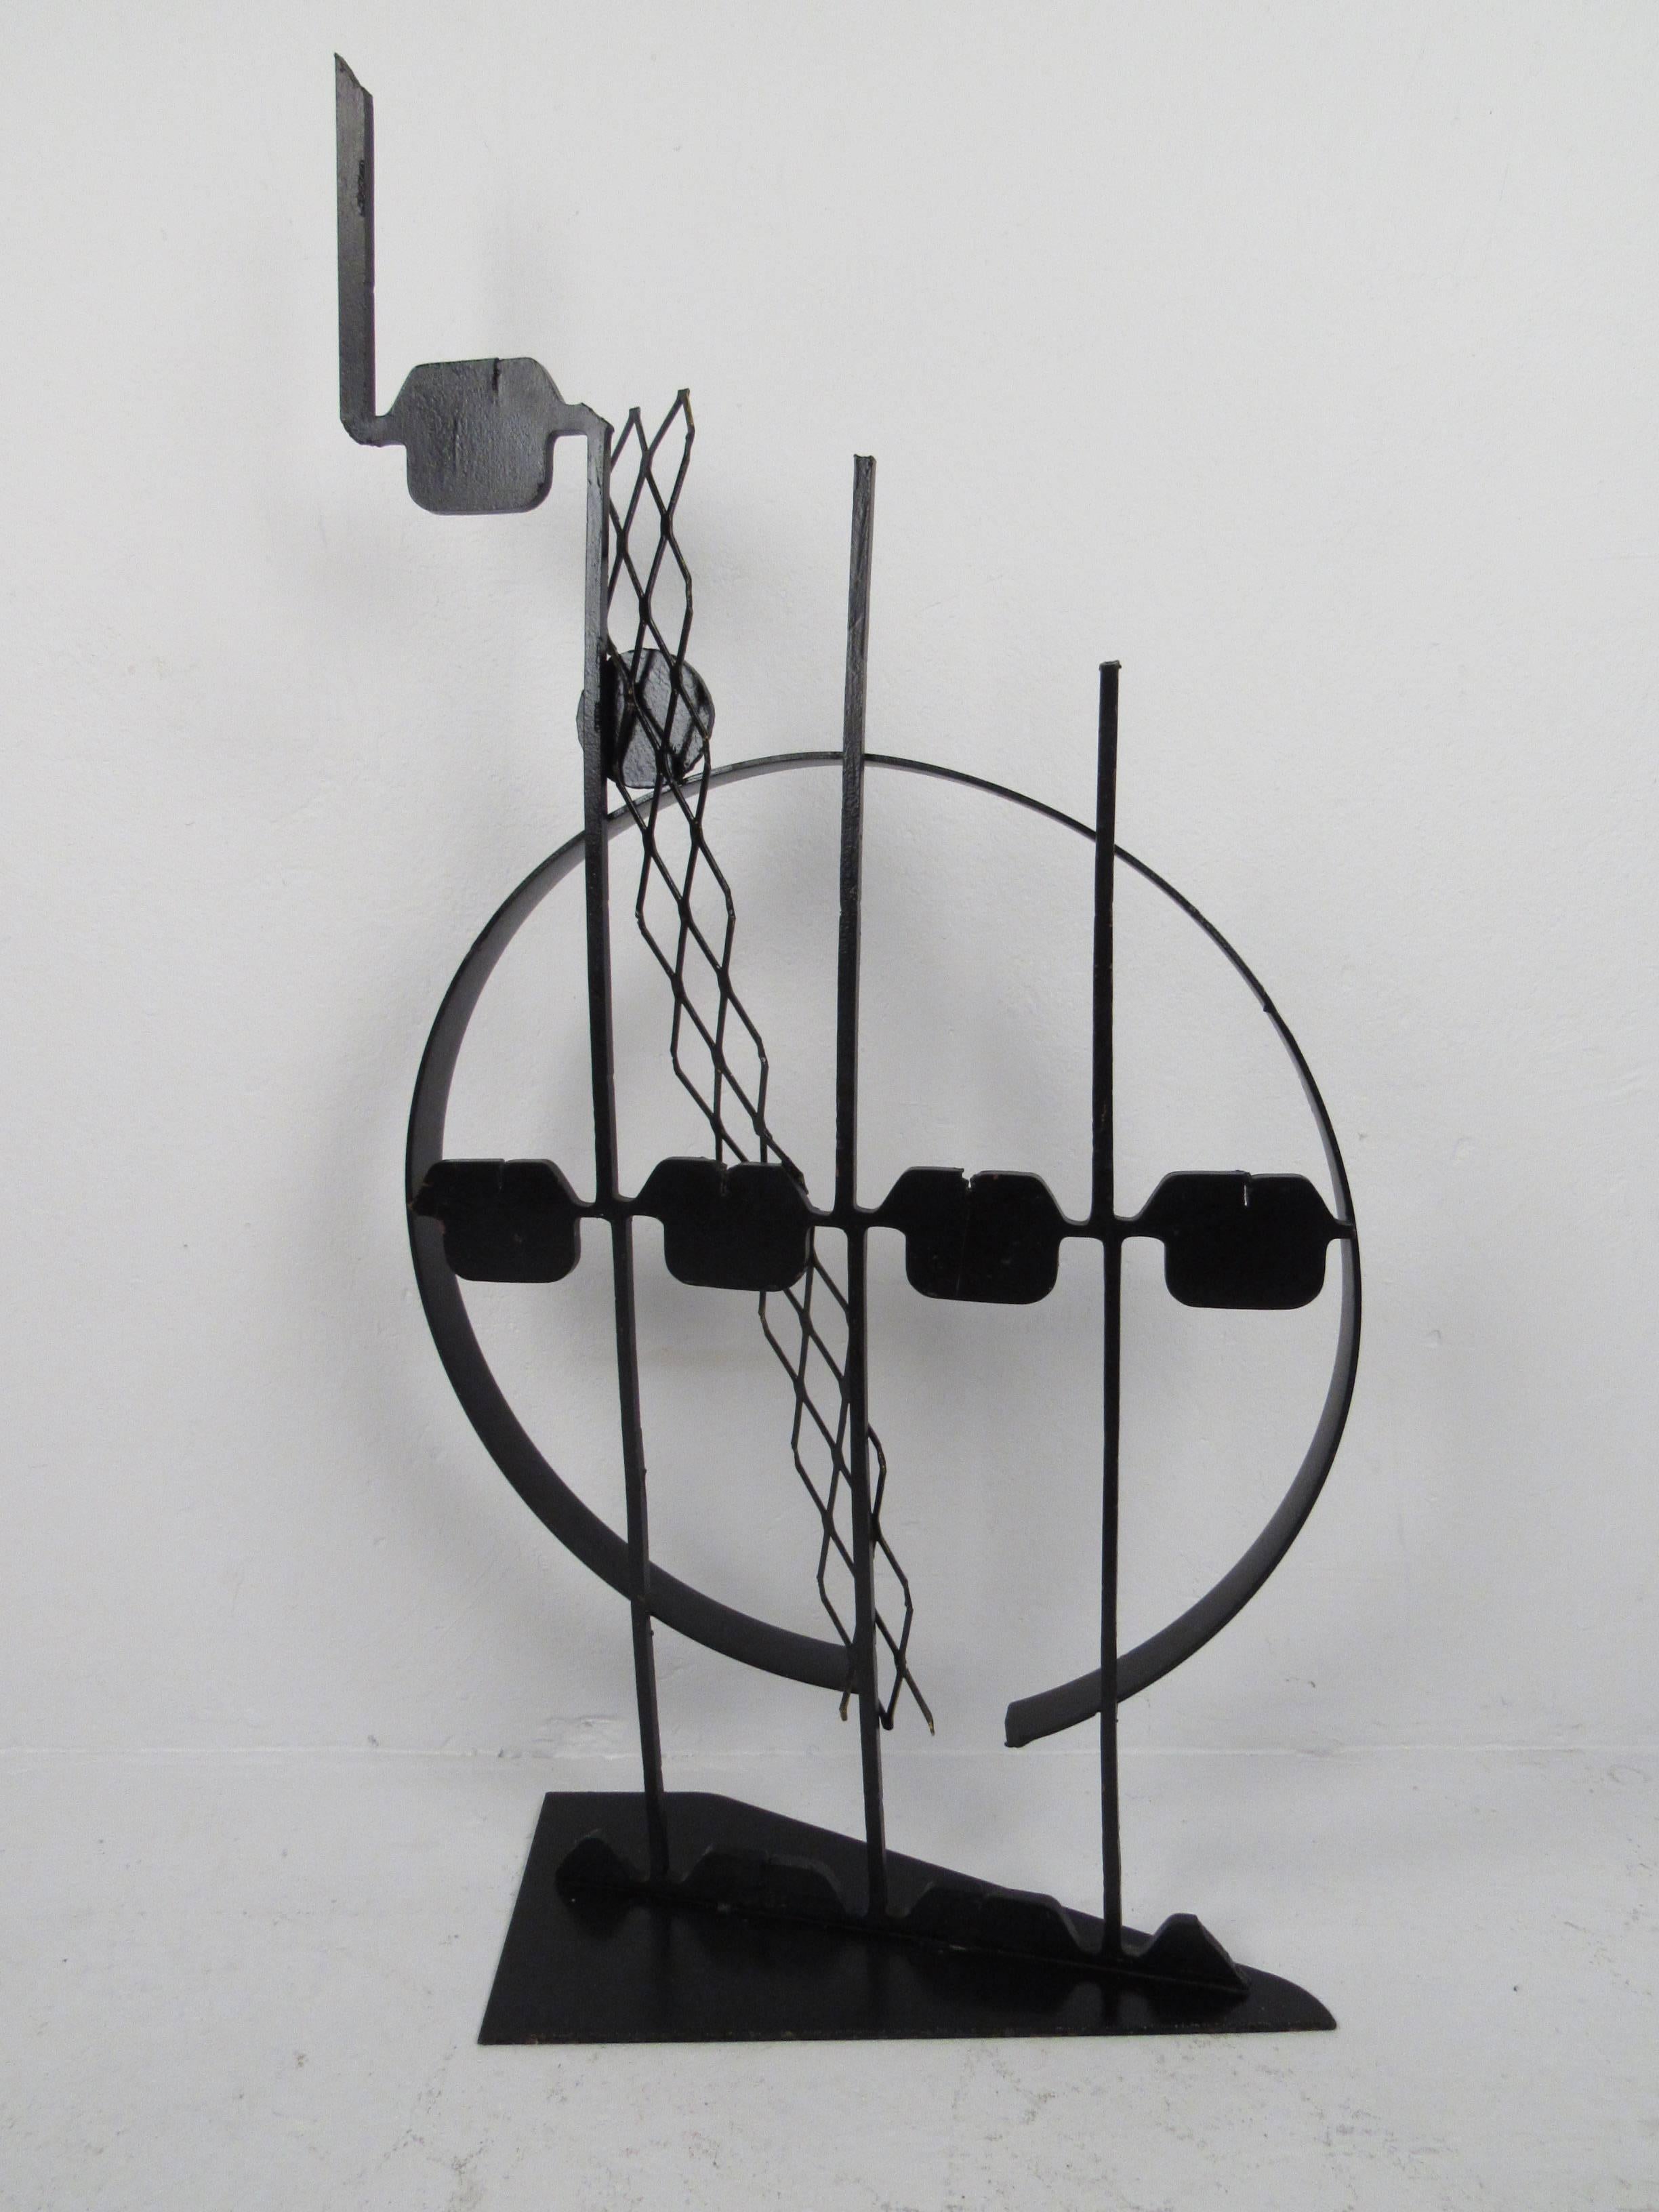 Three dimensional steel sculpture by unknown artist. Perfect for collectors of art, metal, and shapes. Please confirm item pickup location (Brooklyn or NJ) with seller.